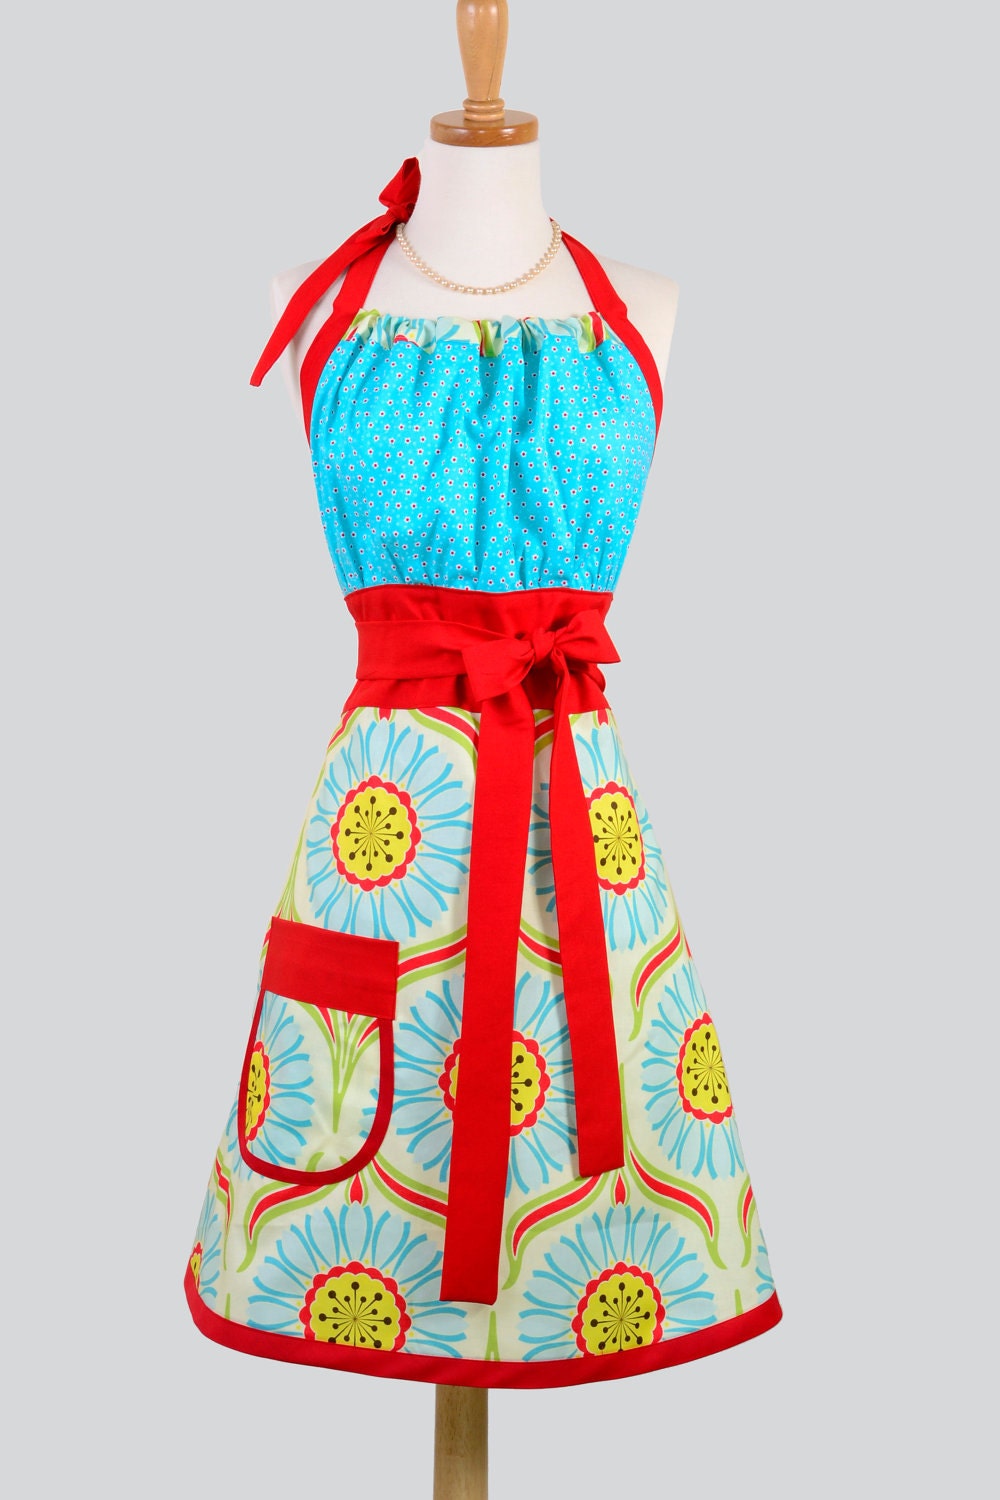 Cute Kitsch Apron / Red and Aqua Mix it up In Heather Bailey Pop Garden and Michael Miller Blue and Red